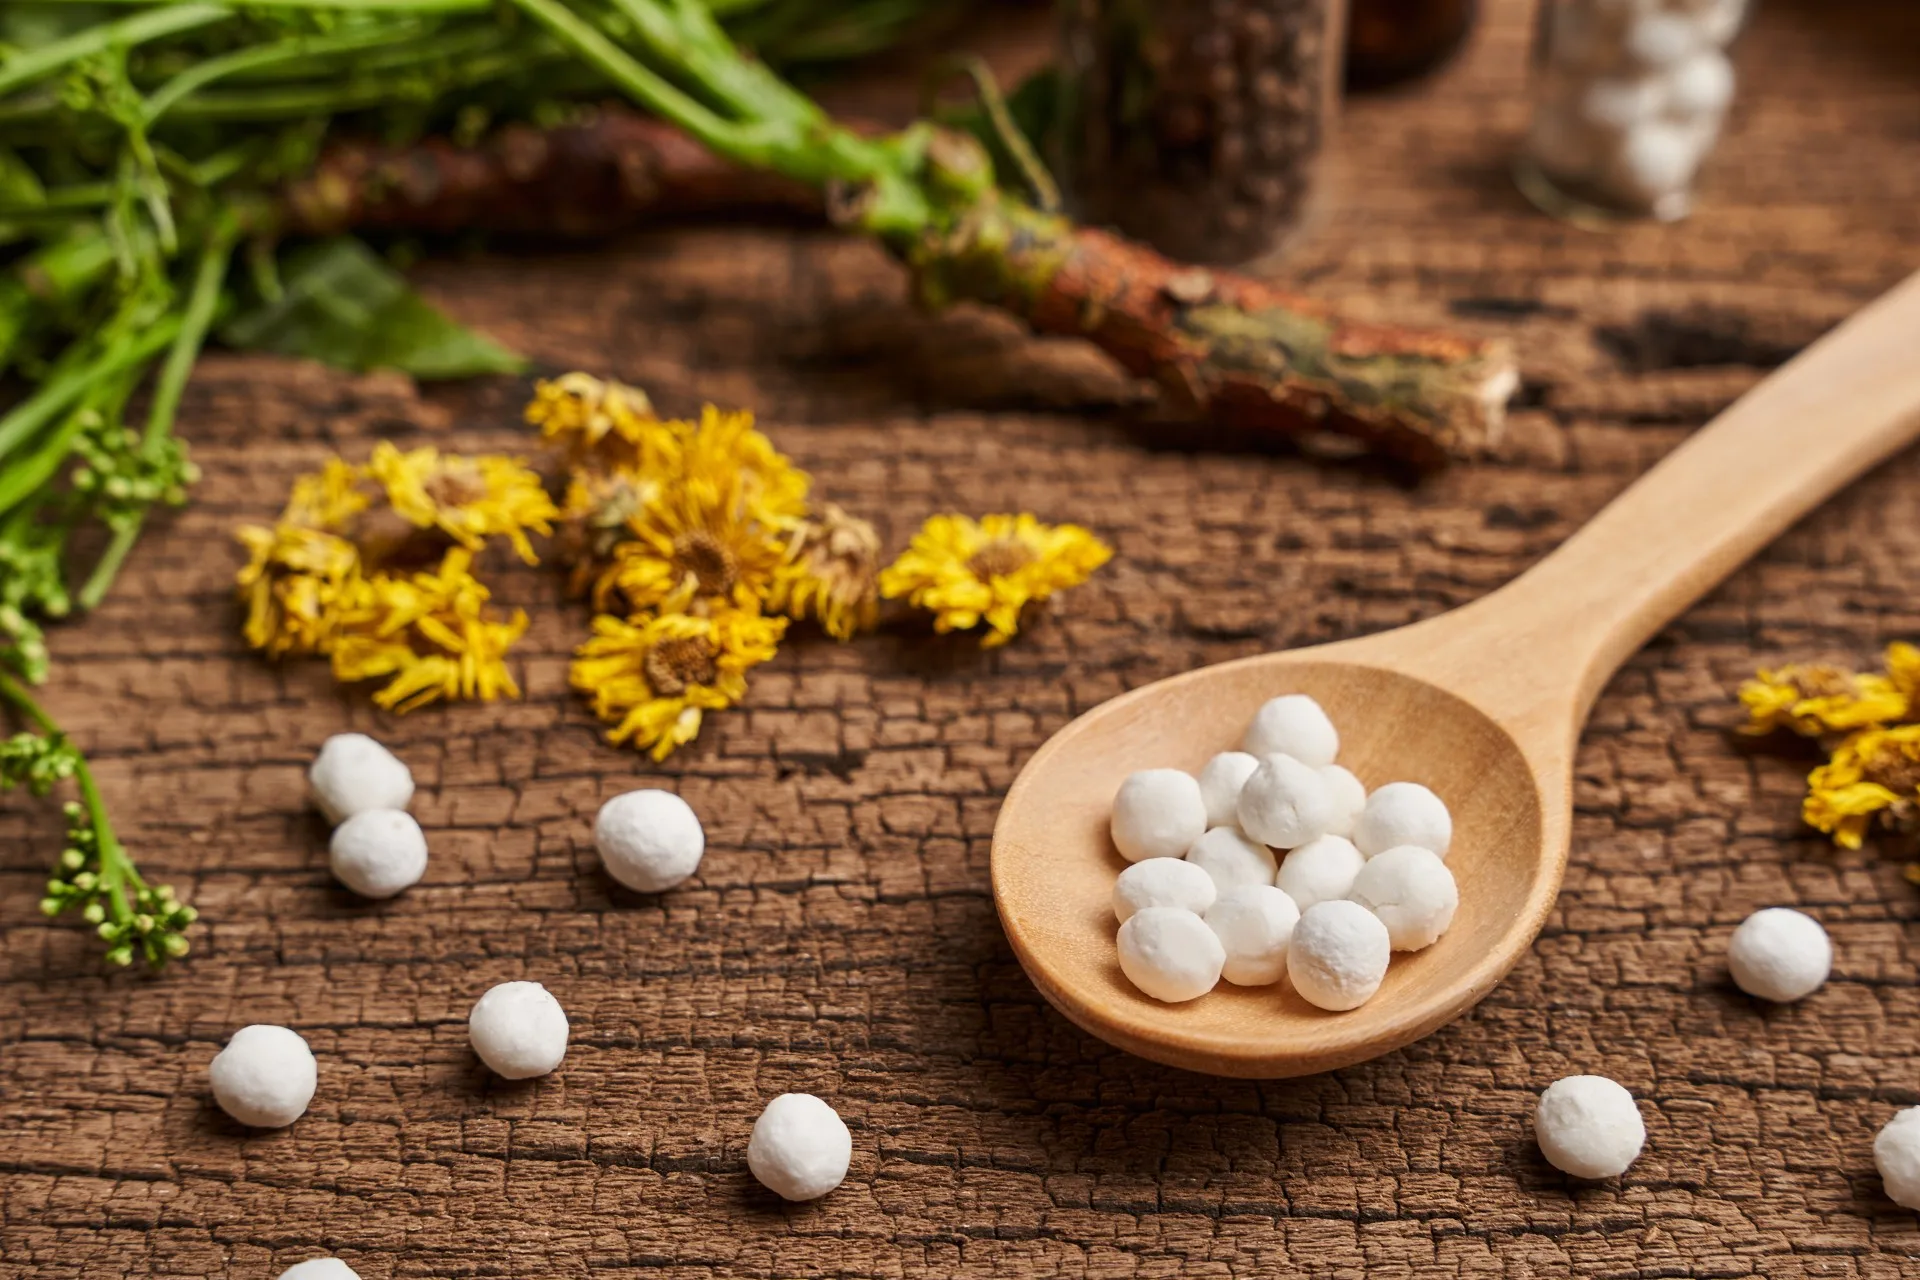 homeopathic remedies in a spoon